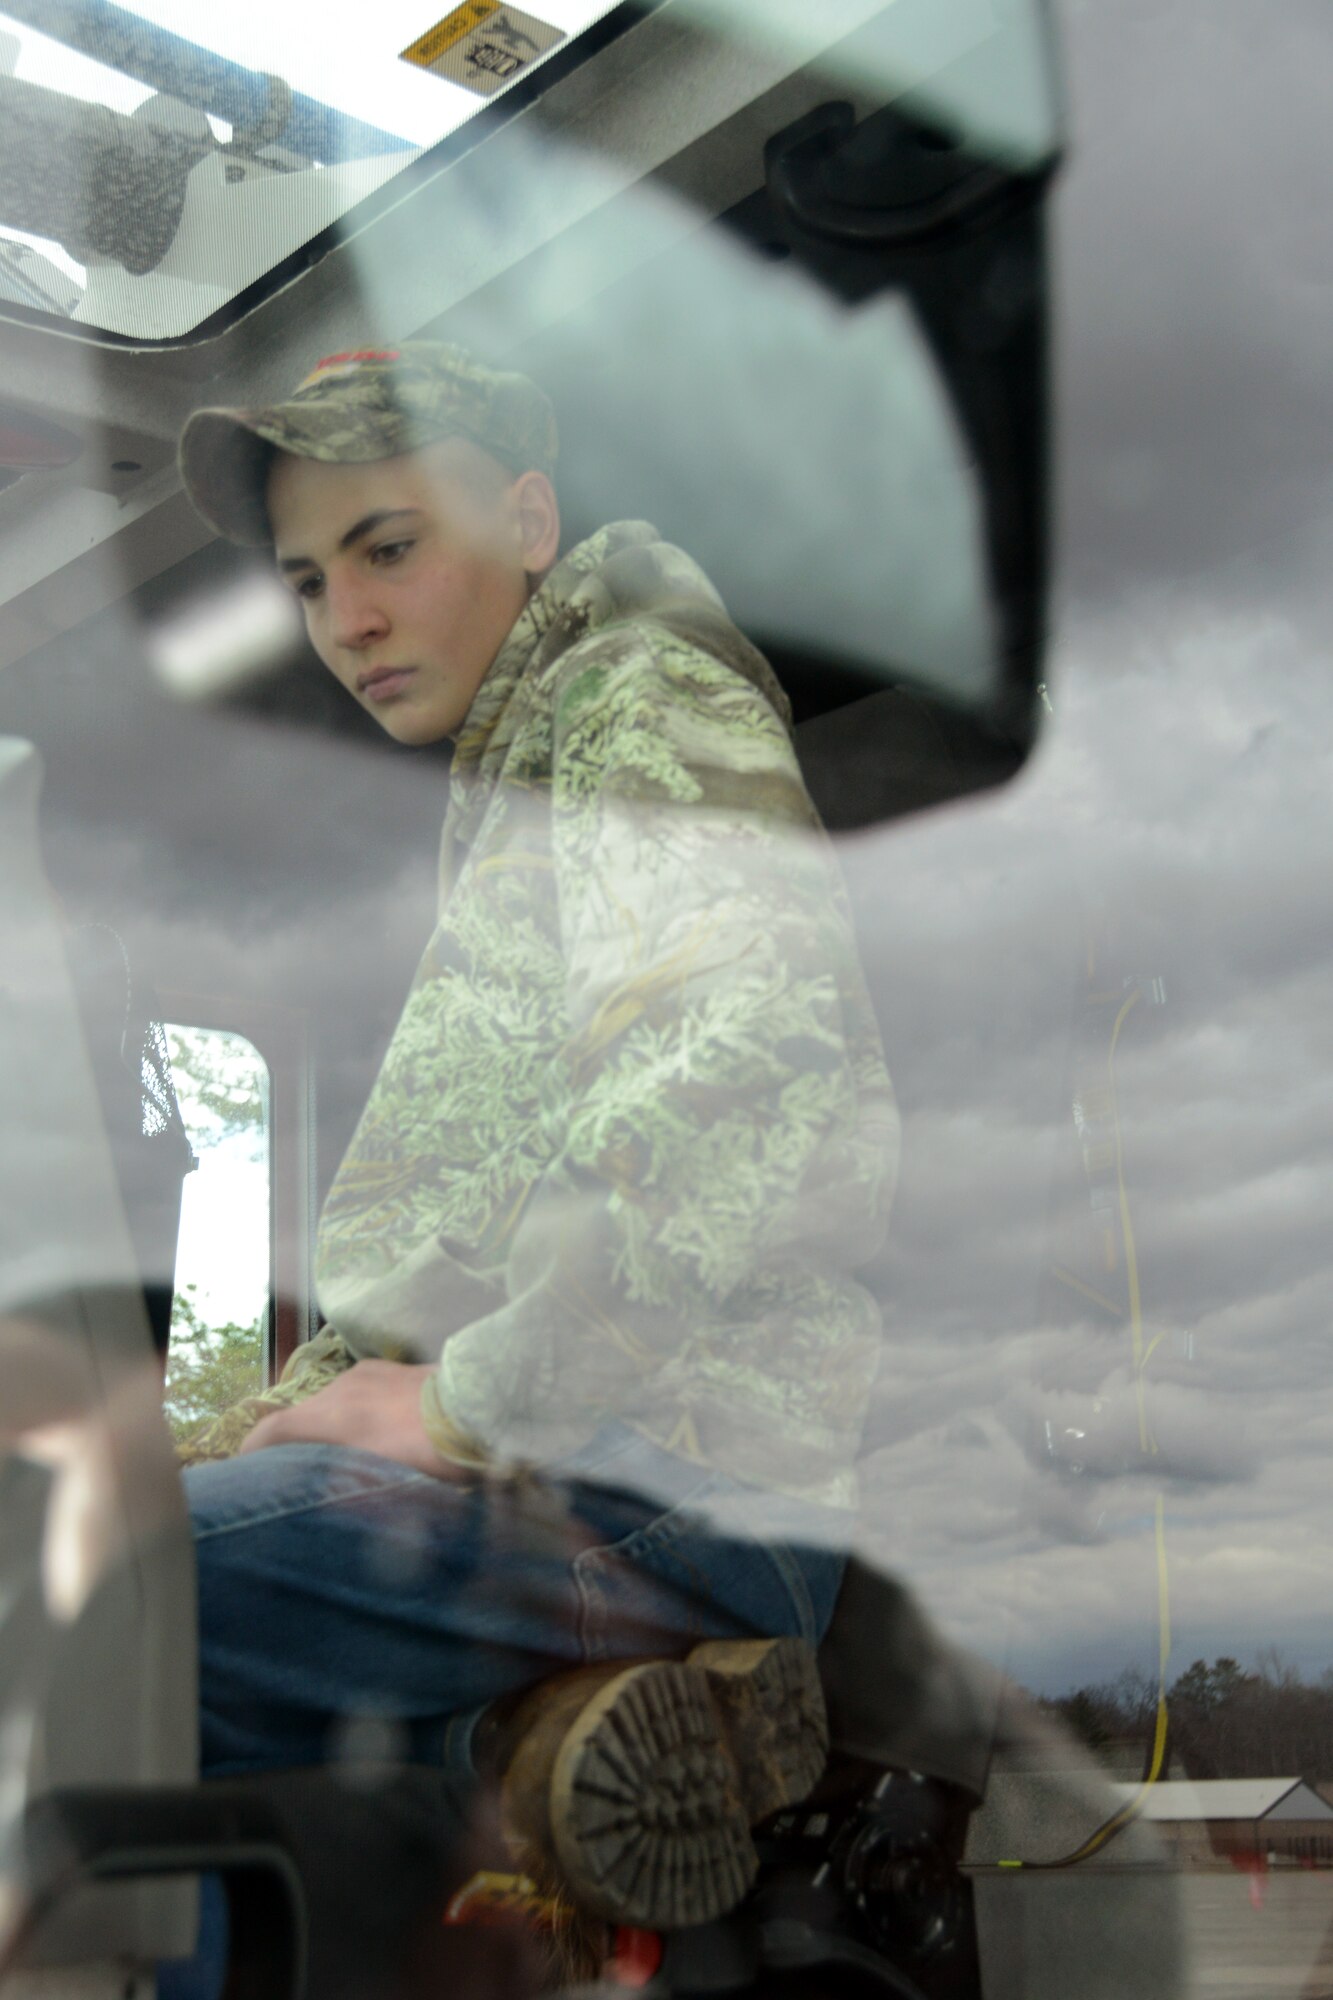 Cody Kirkland, 16, son of Master Sgt. Kirk Foran, 103rd Maintenance Group, inspects his surroundings as he sits inside the cab of a crash and fire rescue truck assigned to the 103rd Civil Engineering Squadron during the Connecticut Youth Council Program’s tour of Bradley Air National Guard Base, East Granby, Conn., April 5, 2014.  (U.S. Air National Guard photo by Tech. Sgt. Joshua Mead)